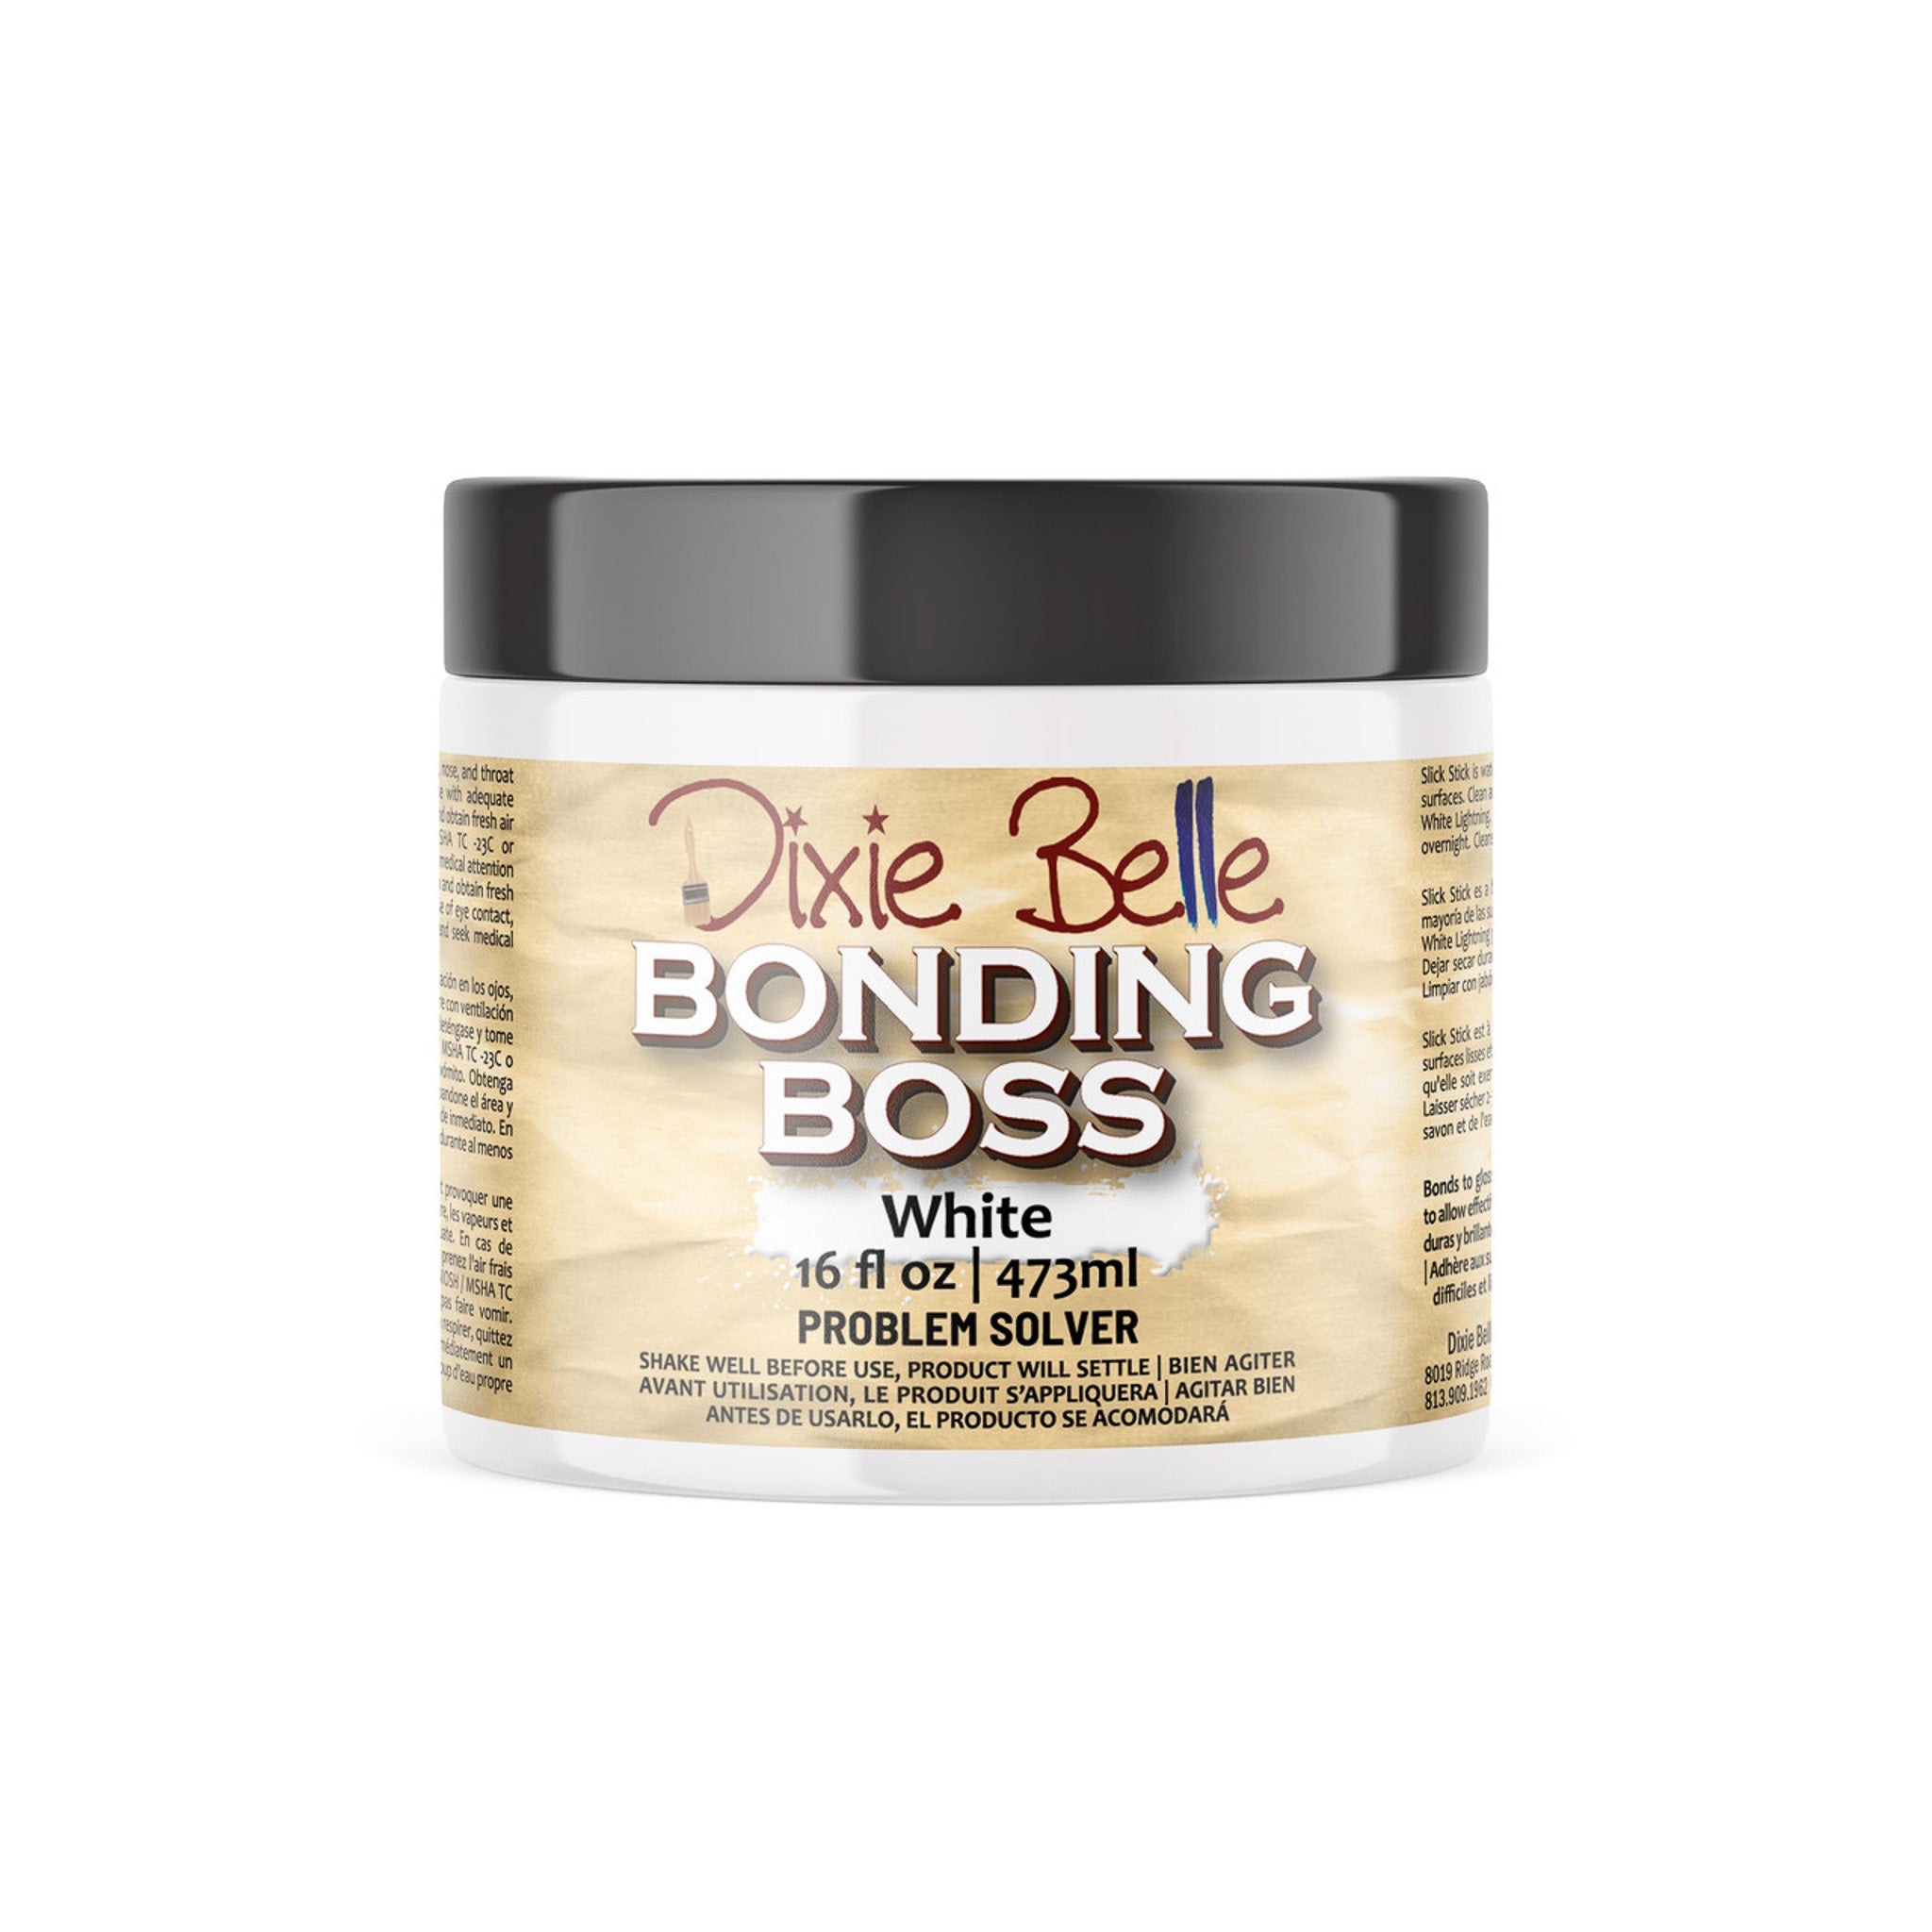 A 16oz container of Dixie Belle's Bonding Boss in White is against a white background.